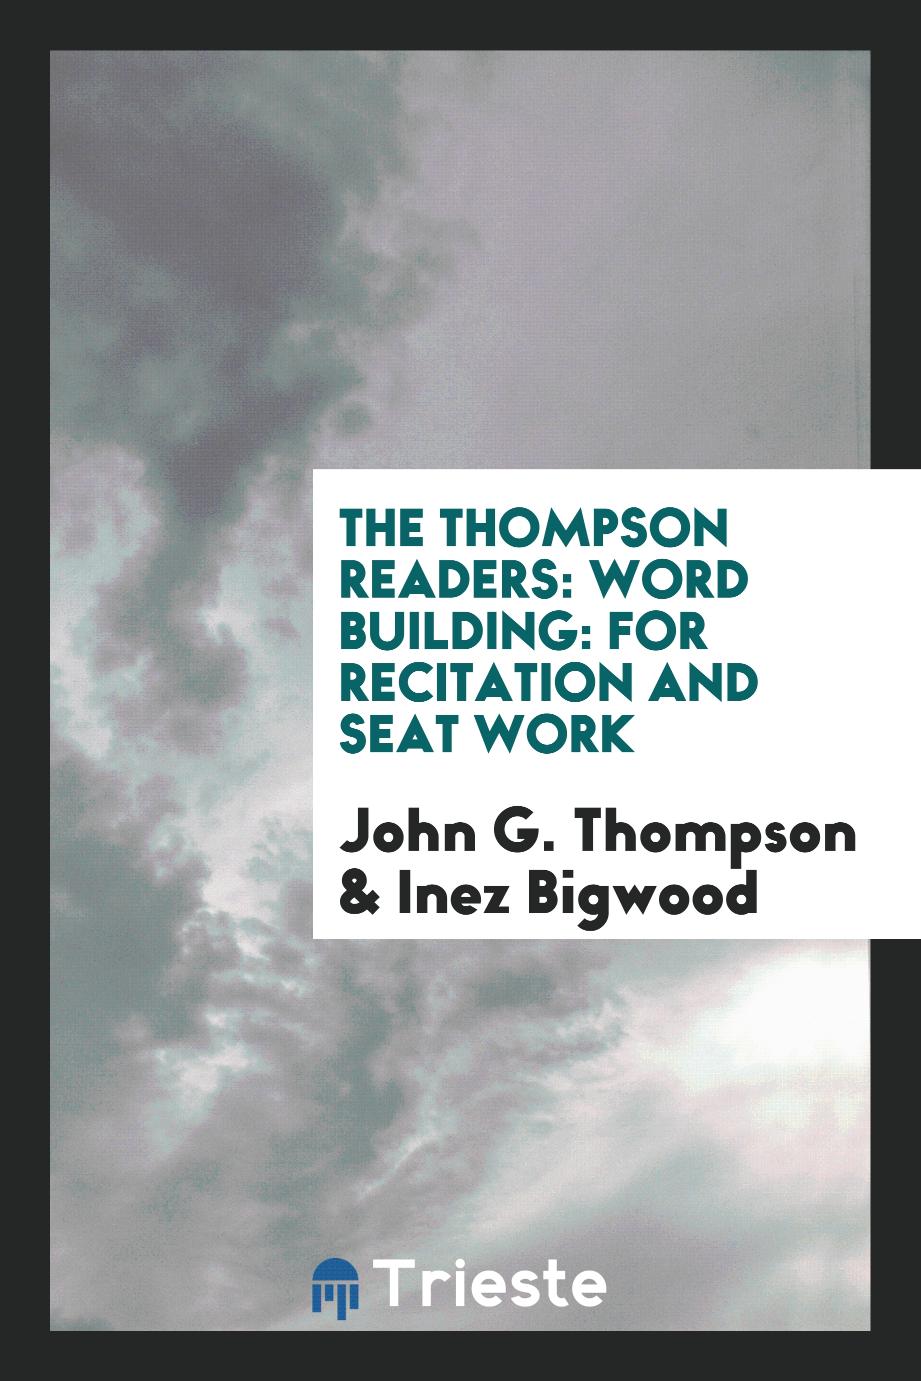 The Thompson Readers: Word Building: for Recitation and Seat Work